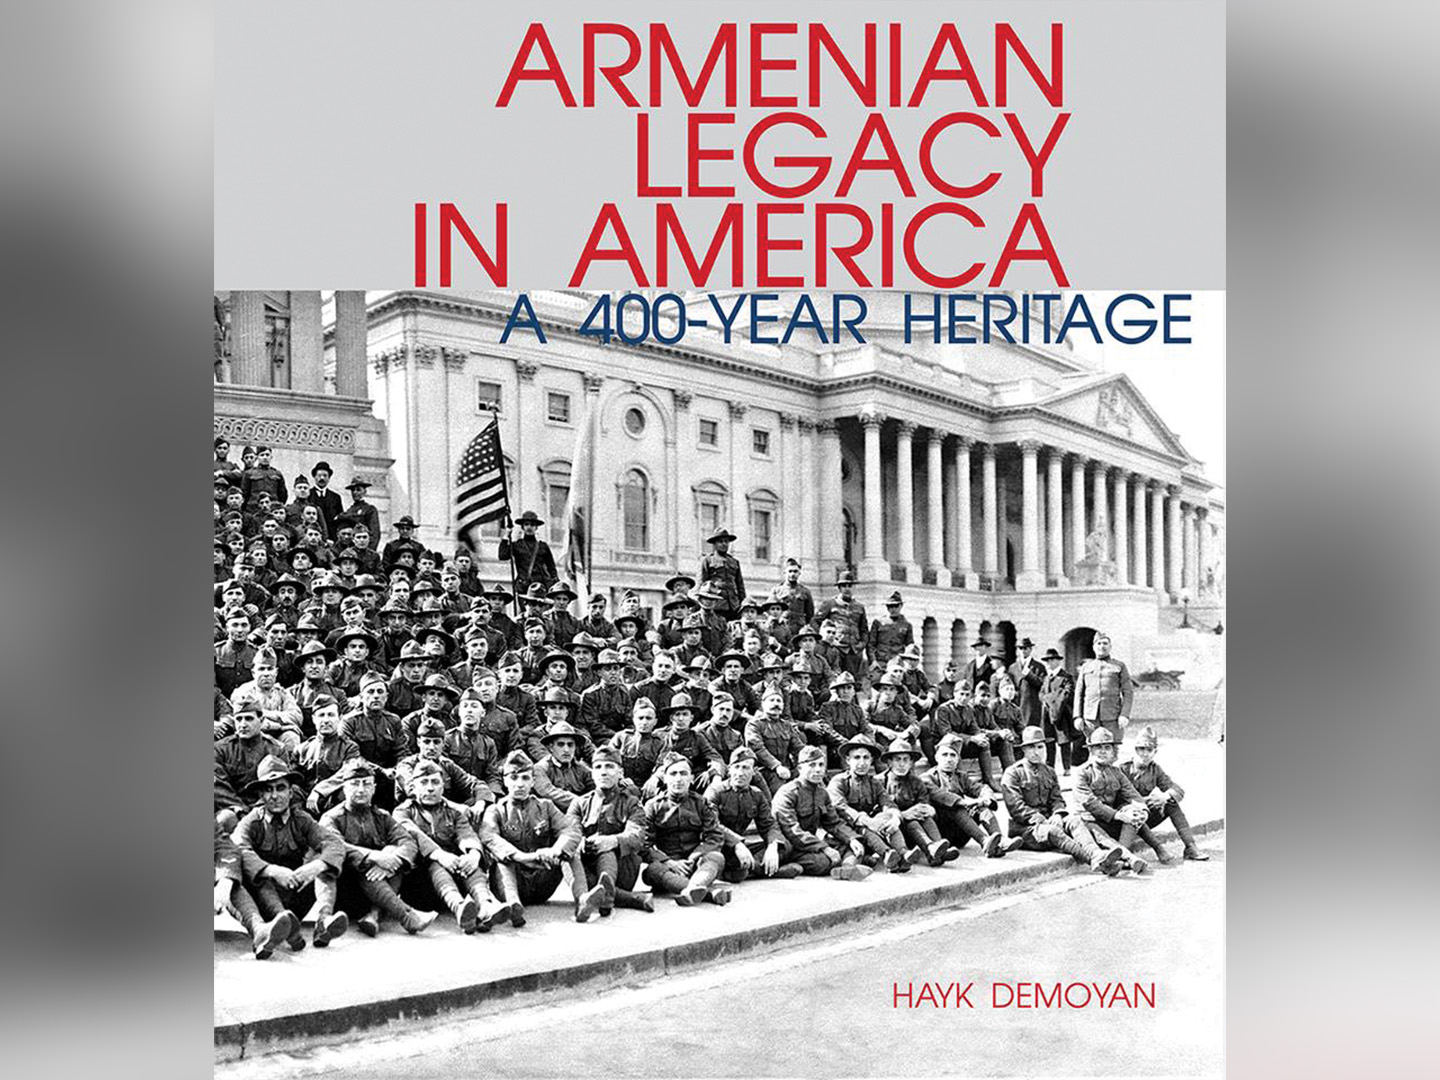 Armenian Legacy in America: A 400-Year Heritage is published by Tigran Metz and is available for purchase online.